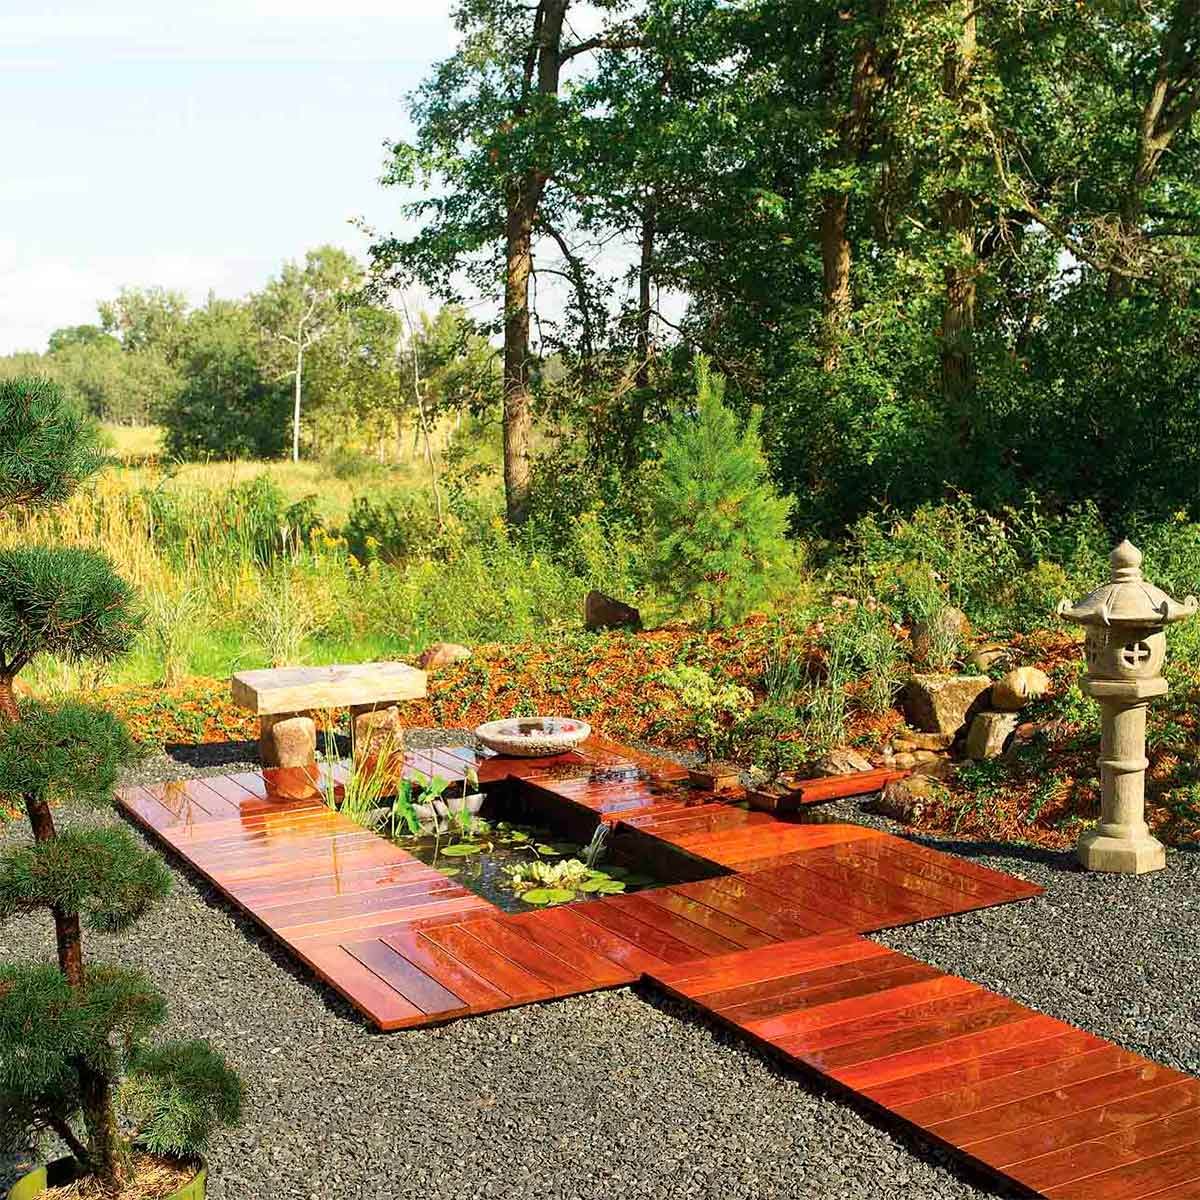 deck pond after show-stopping home projects